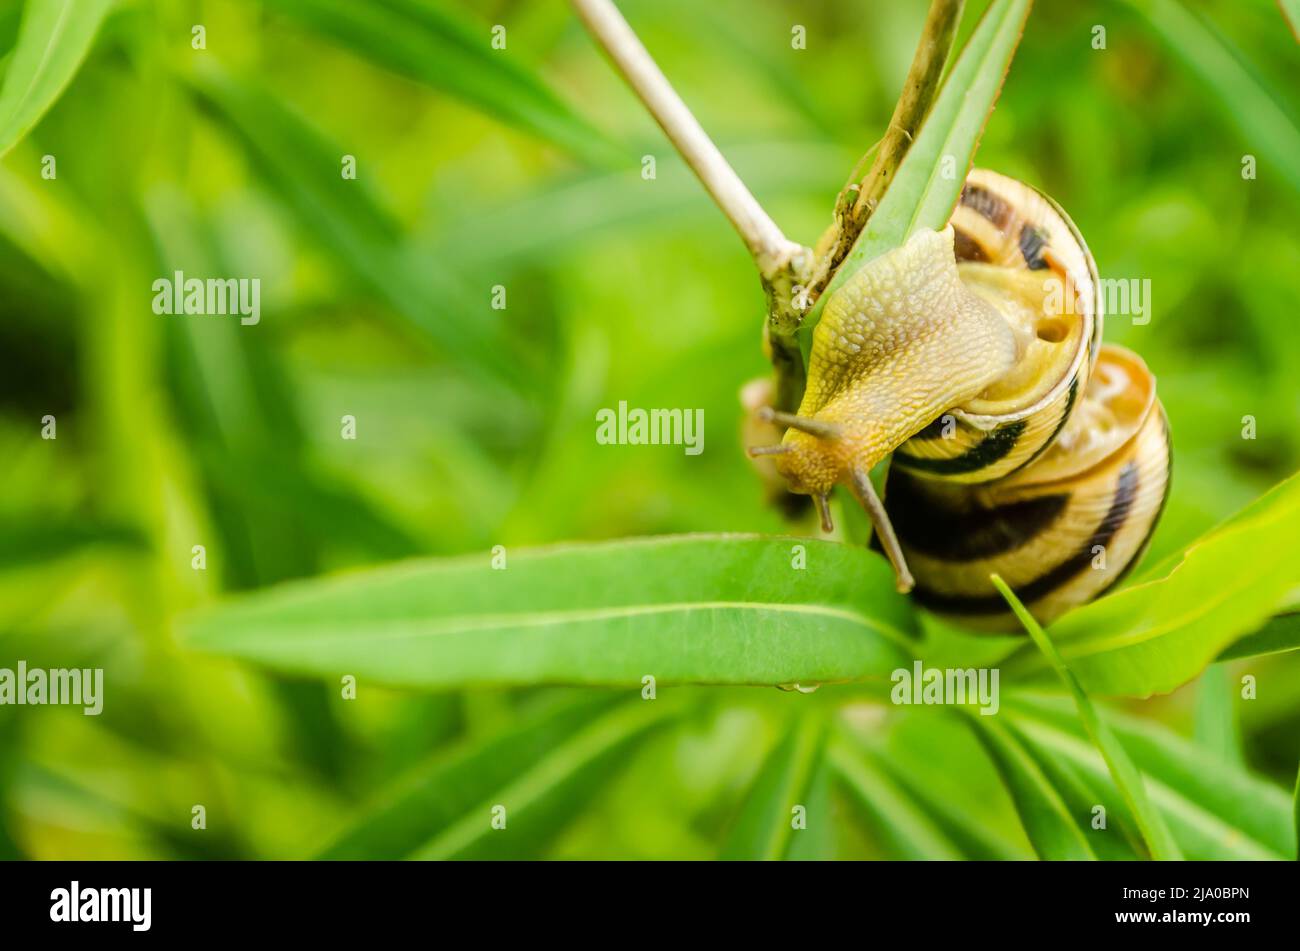 two snails on the green grass. Stock Photo